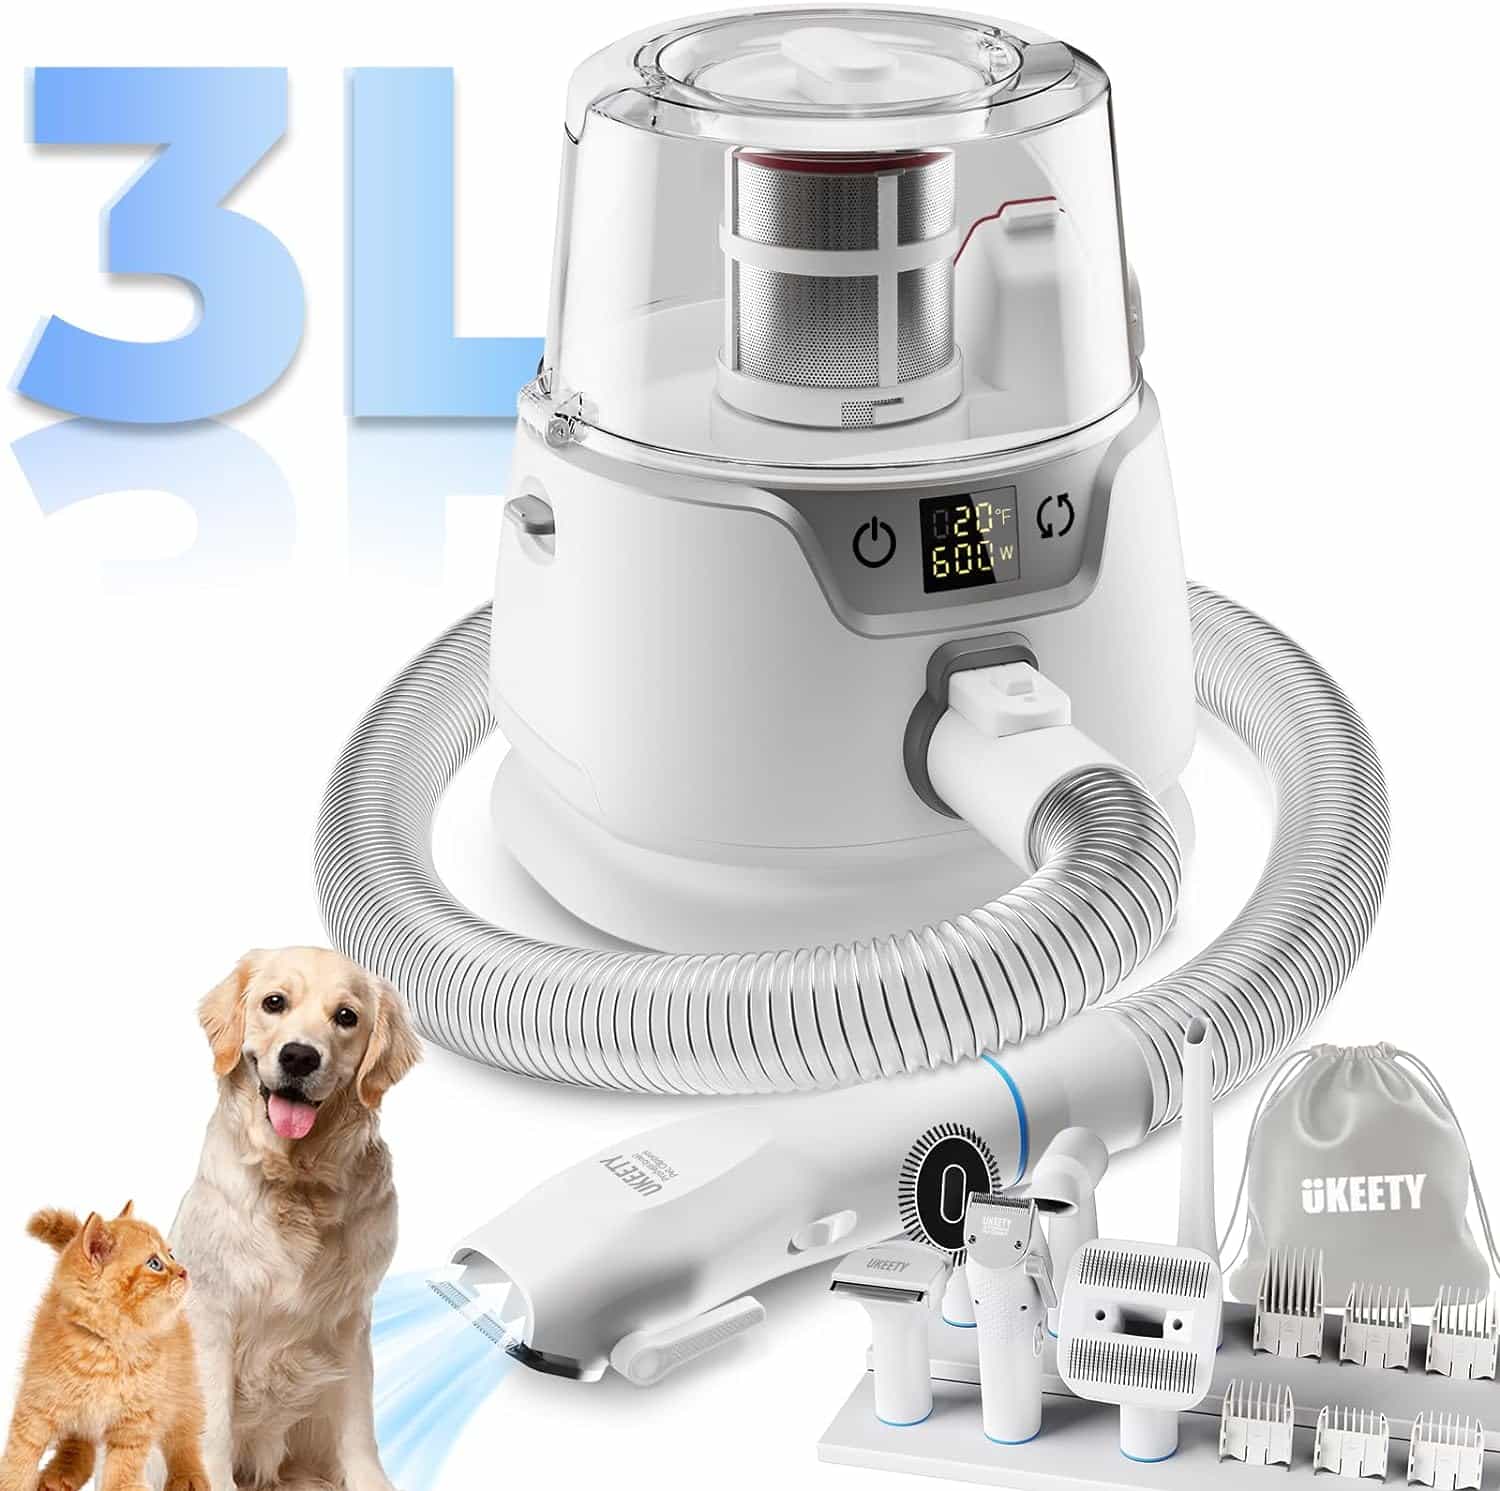 Ukeety Pet Grooming Vacuum: The Ultimate Grooming Kit for Your Furry Friends